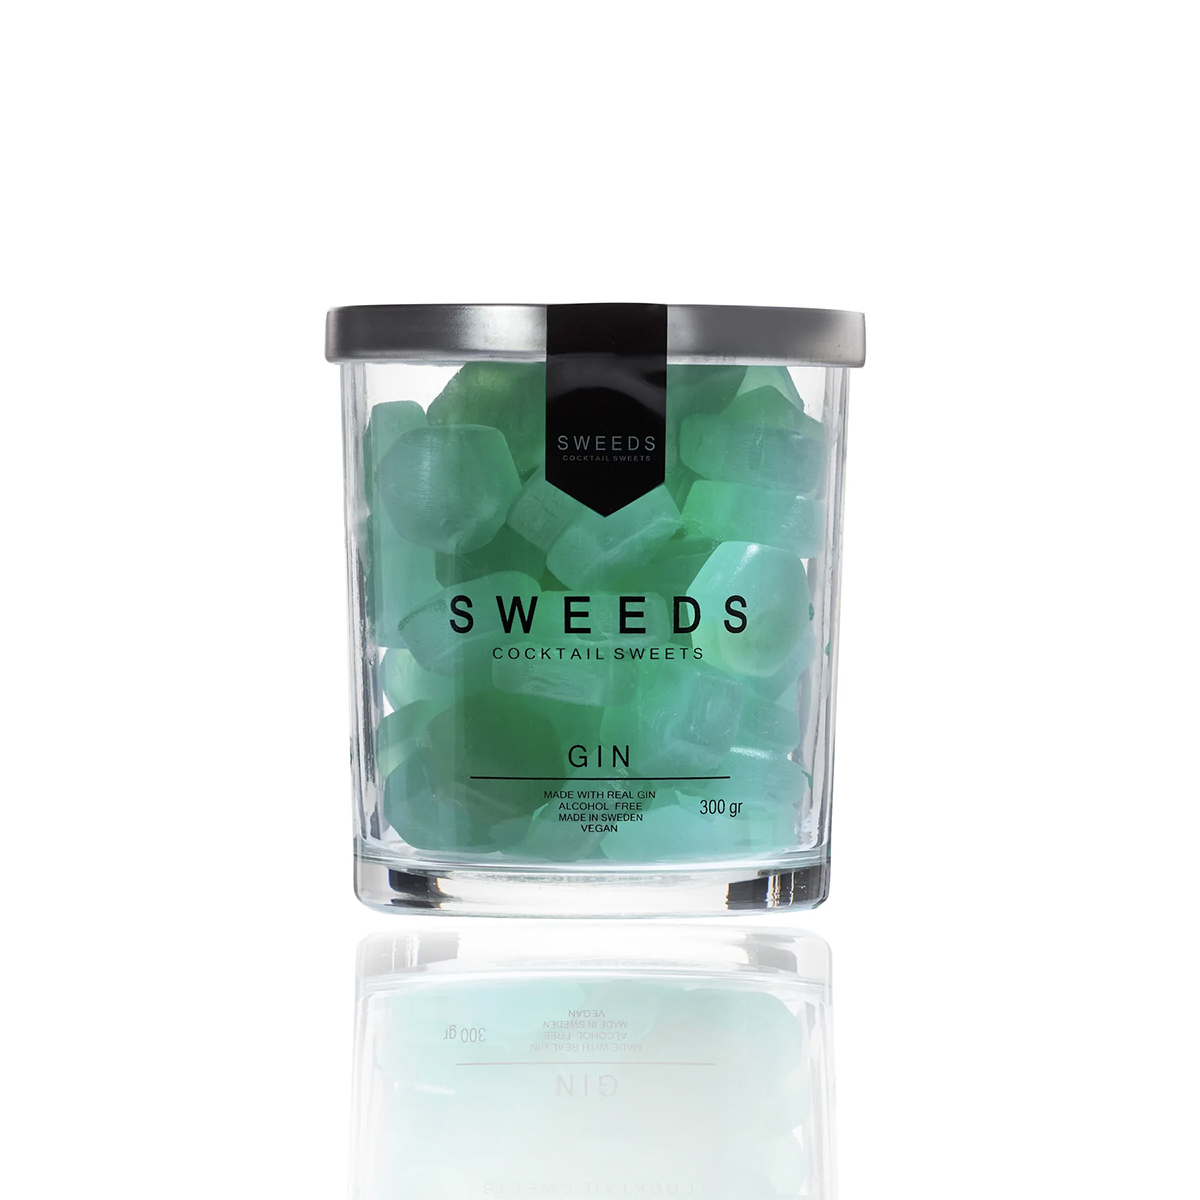 Sweeds Gin Cocktail Sweets